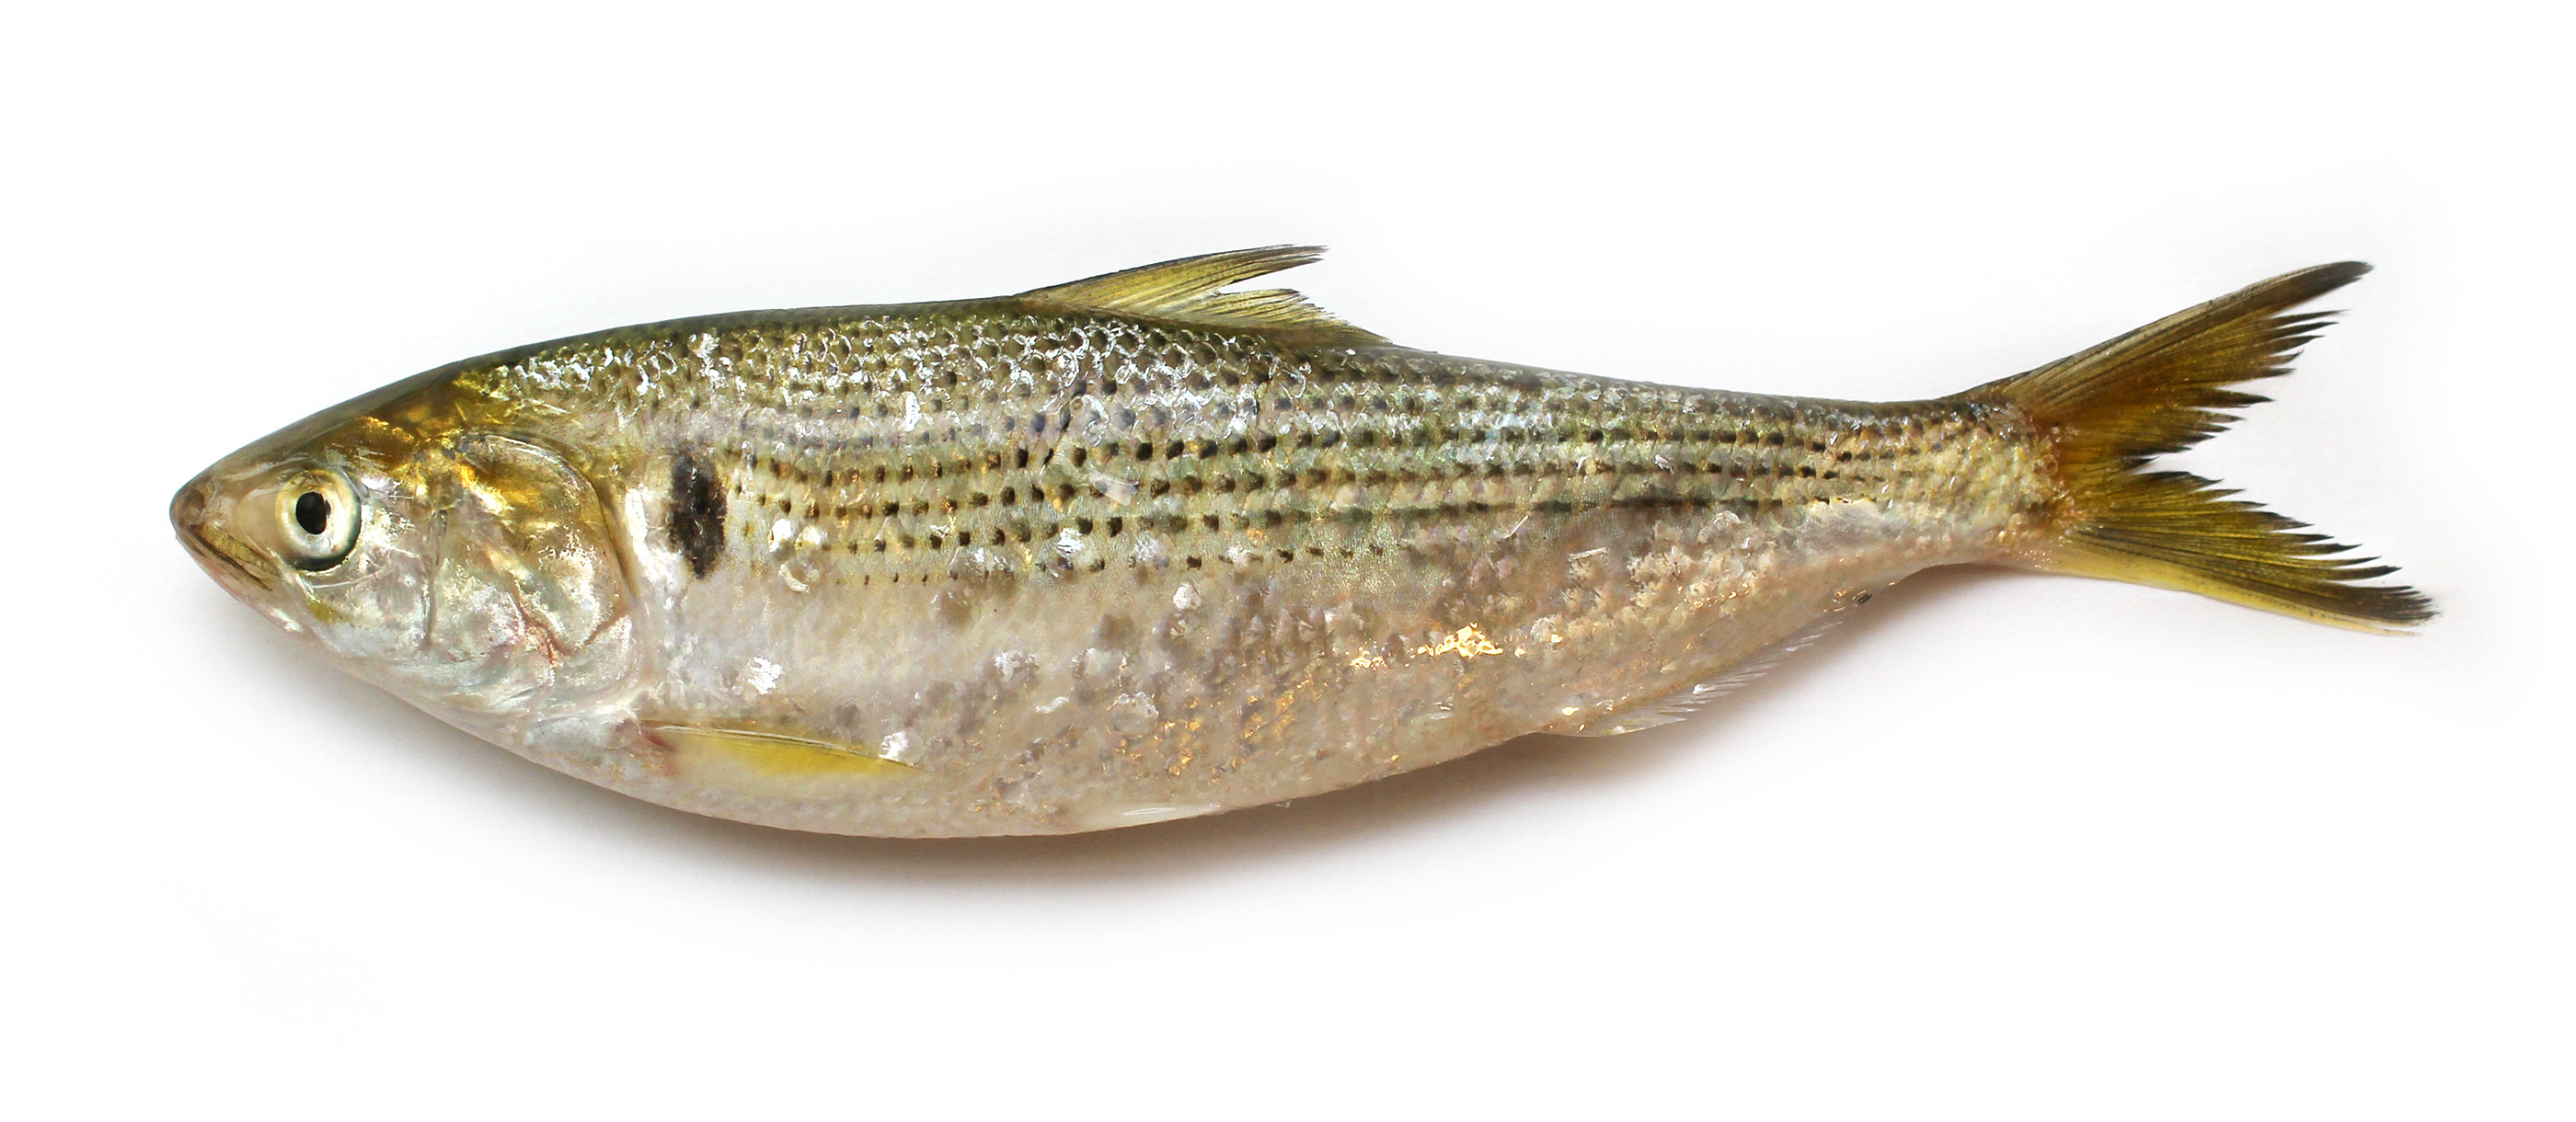 Shad  Local White Fish From Connecticut, United States of America